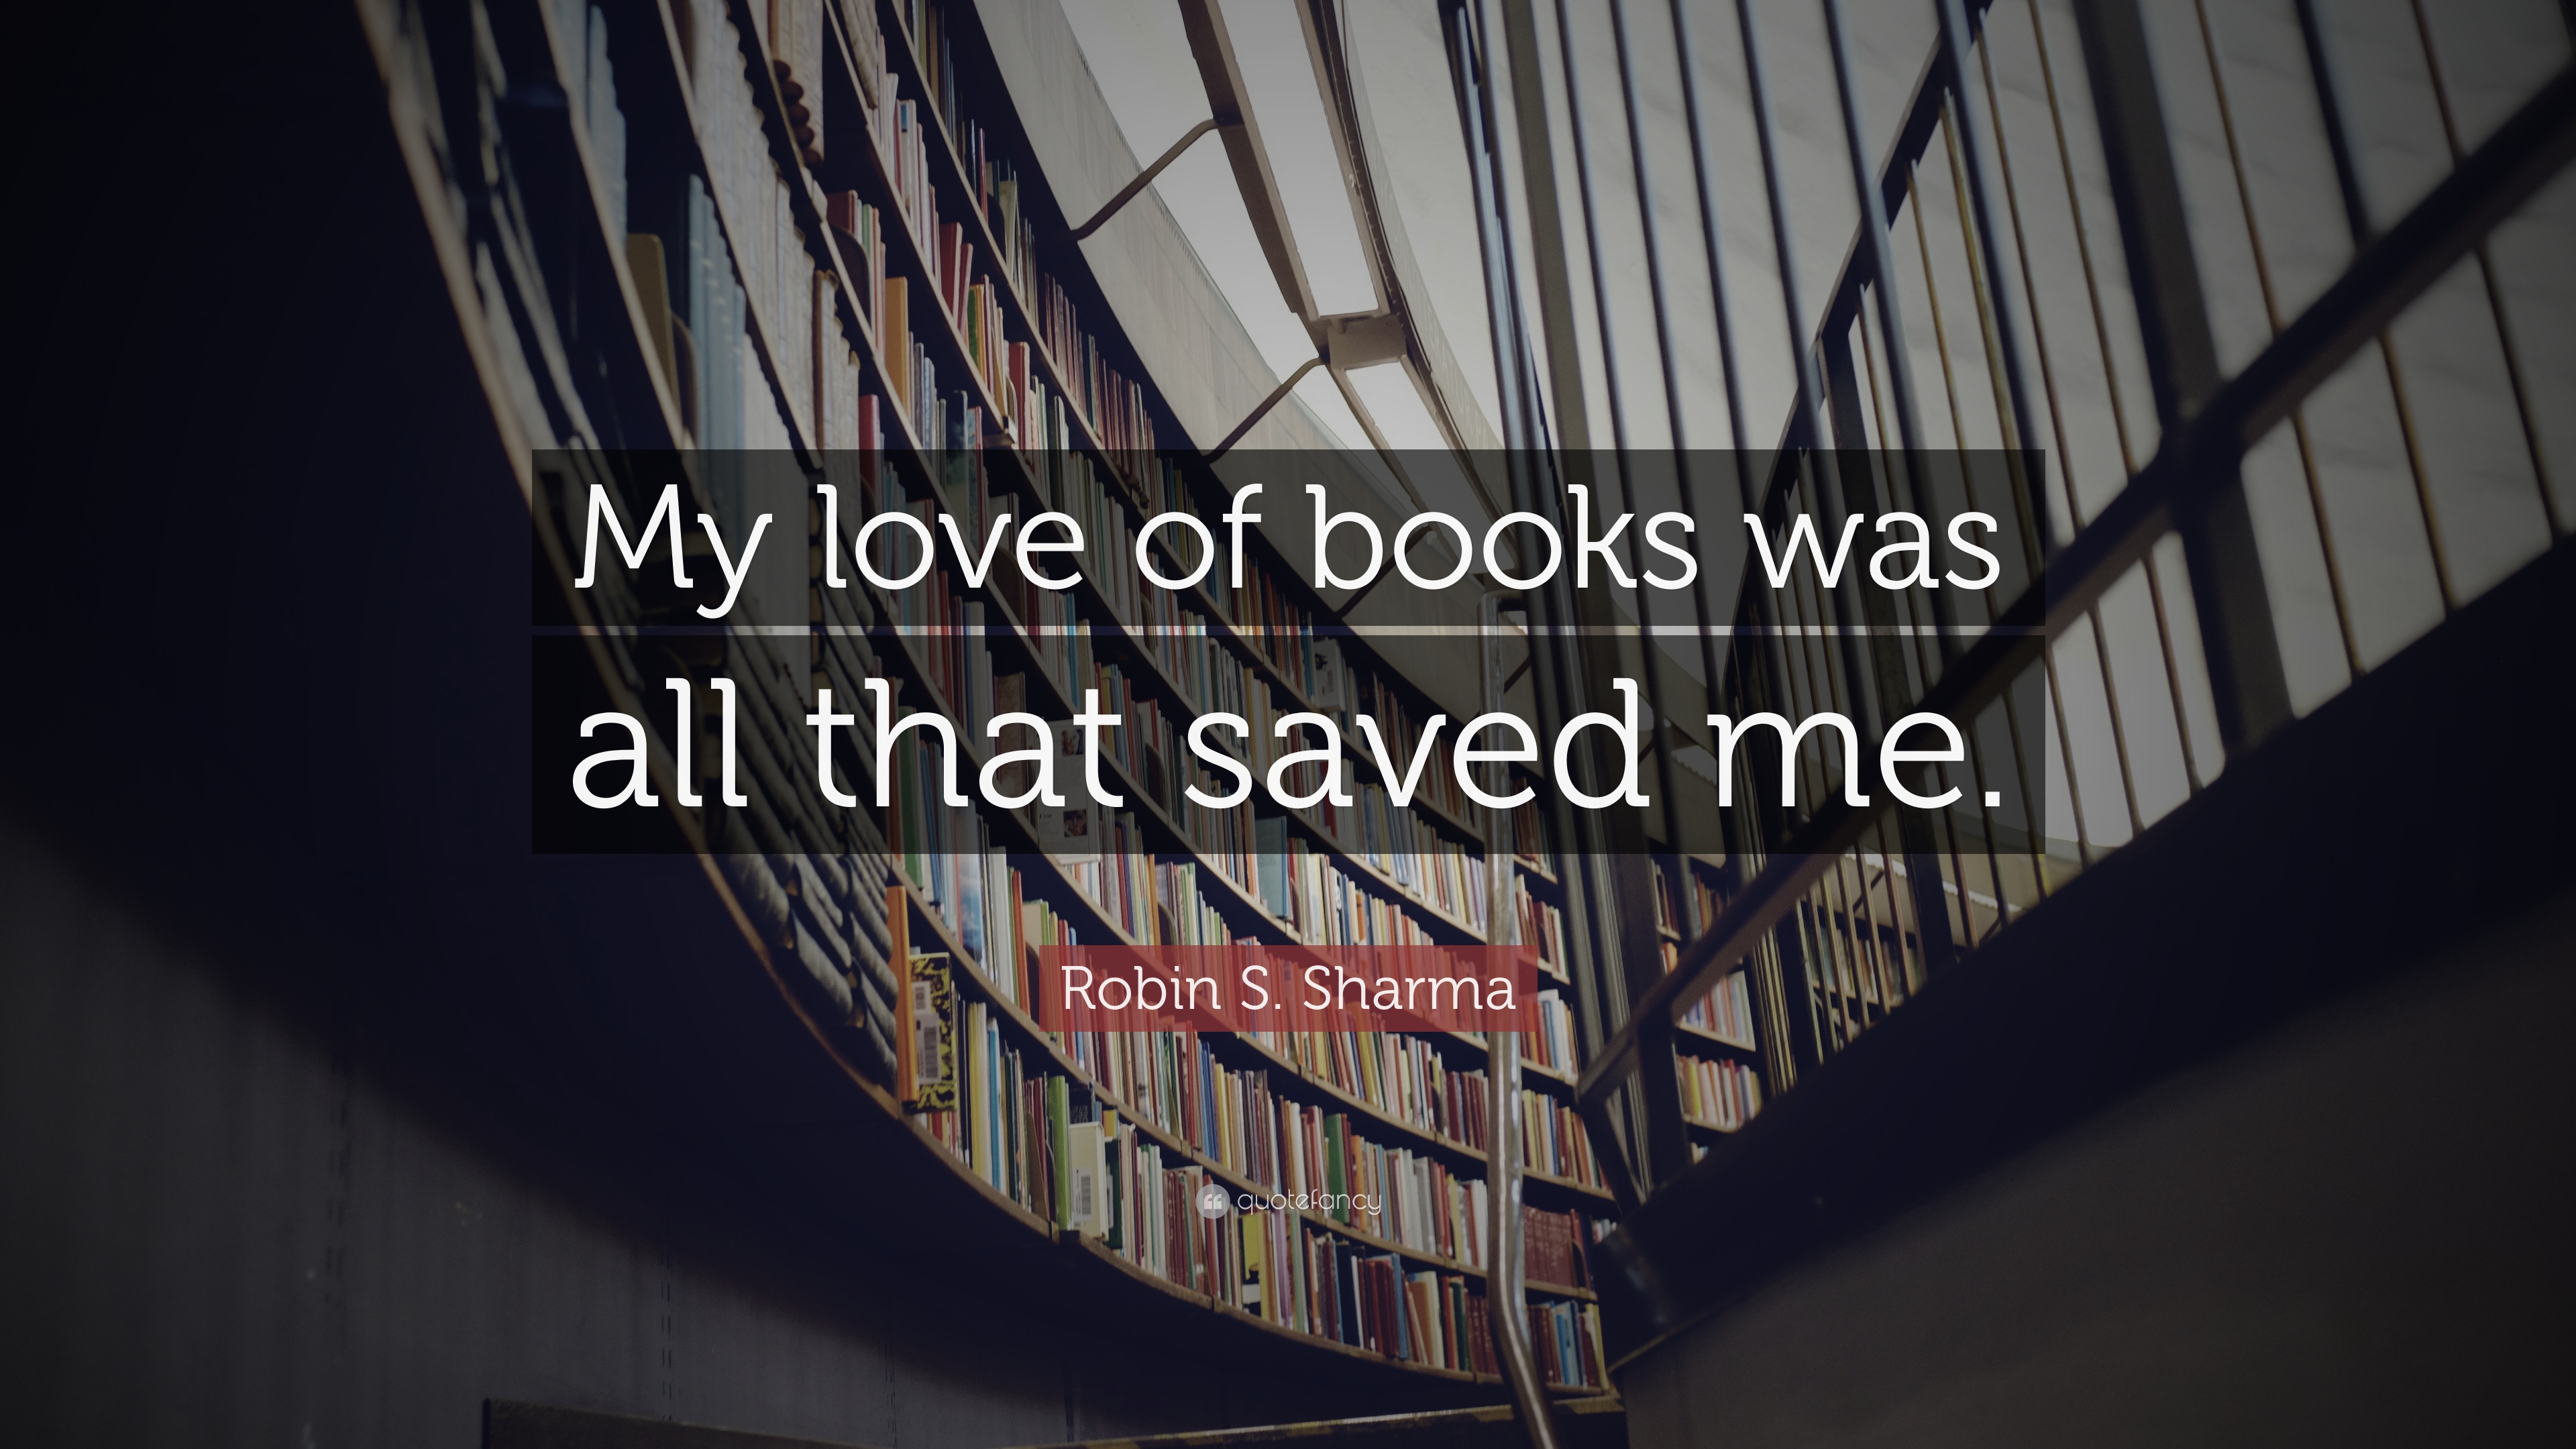 Robin S. Sharma Quote: “My love of books was all that saved me.” (12 ...